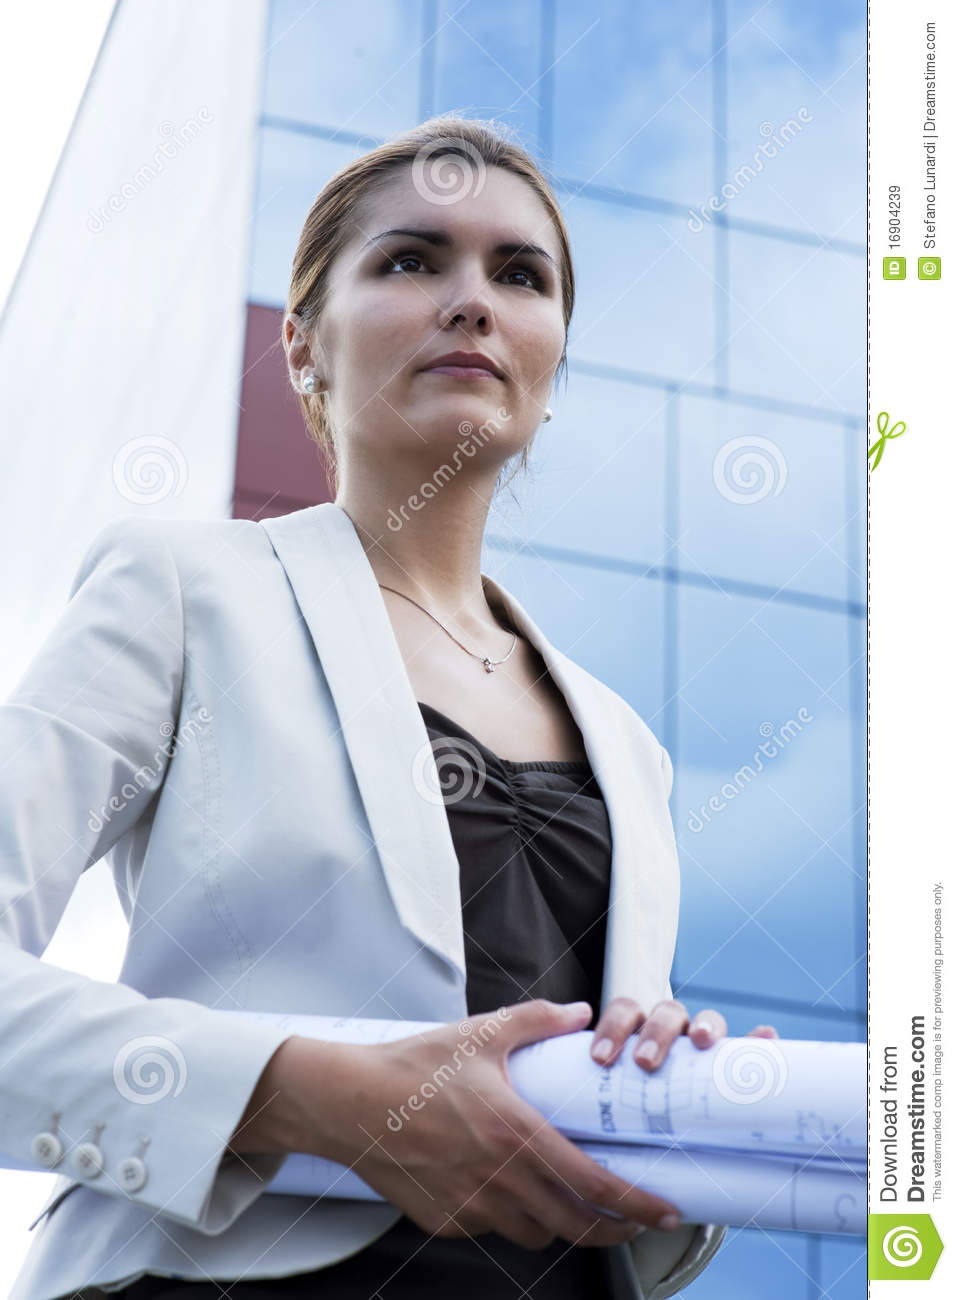 Young Female Engineer Royalty Free Stock Images   Image  16904239